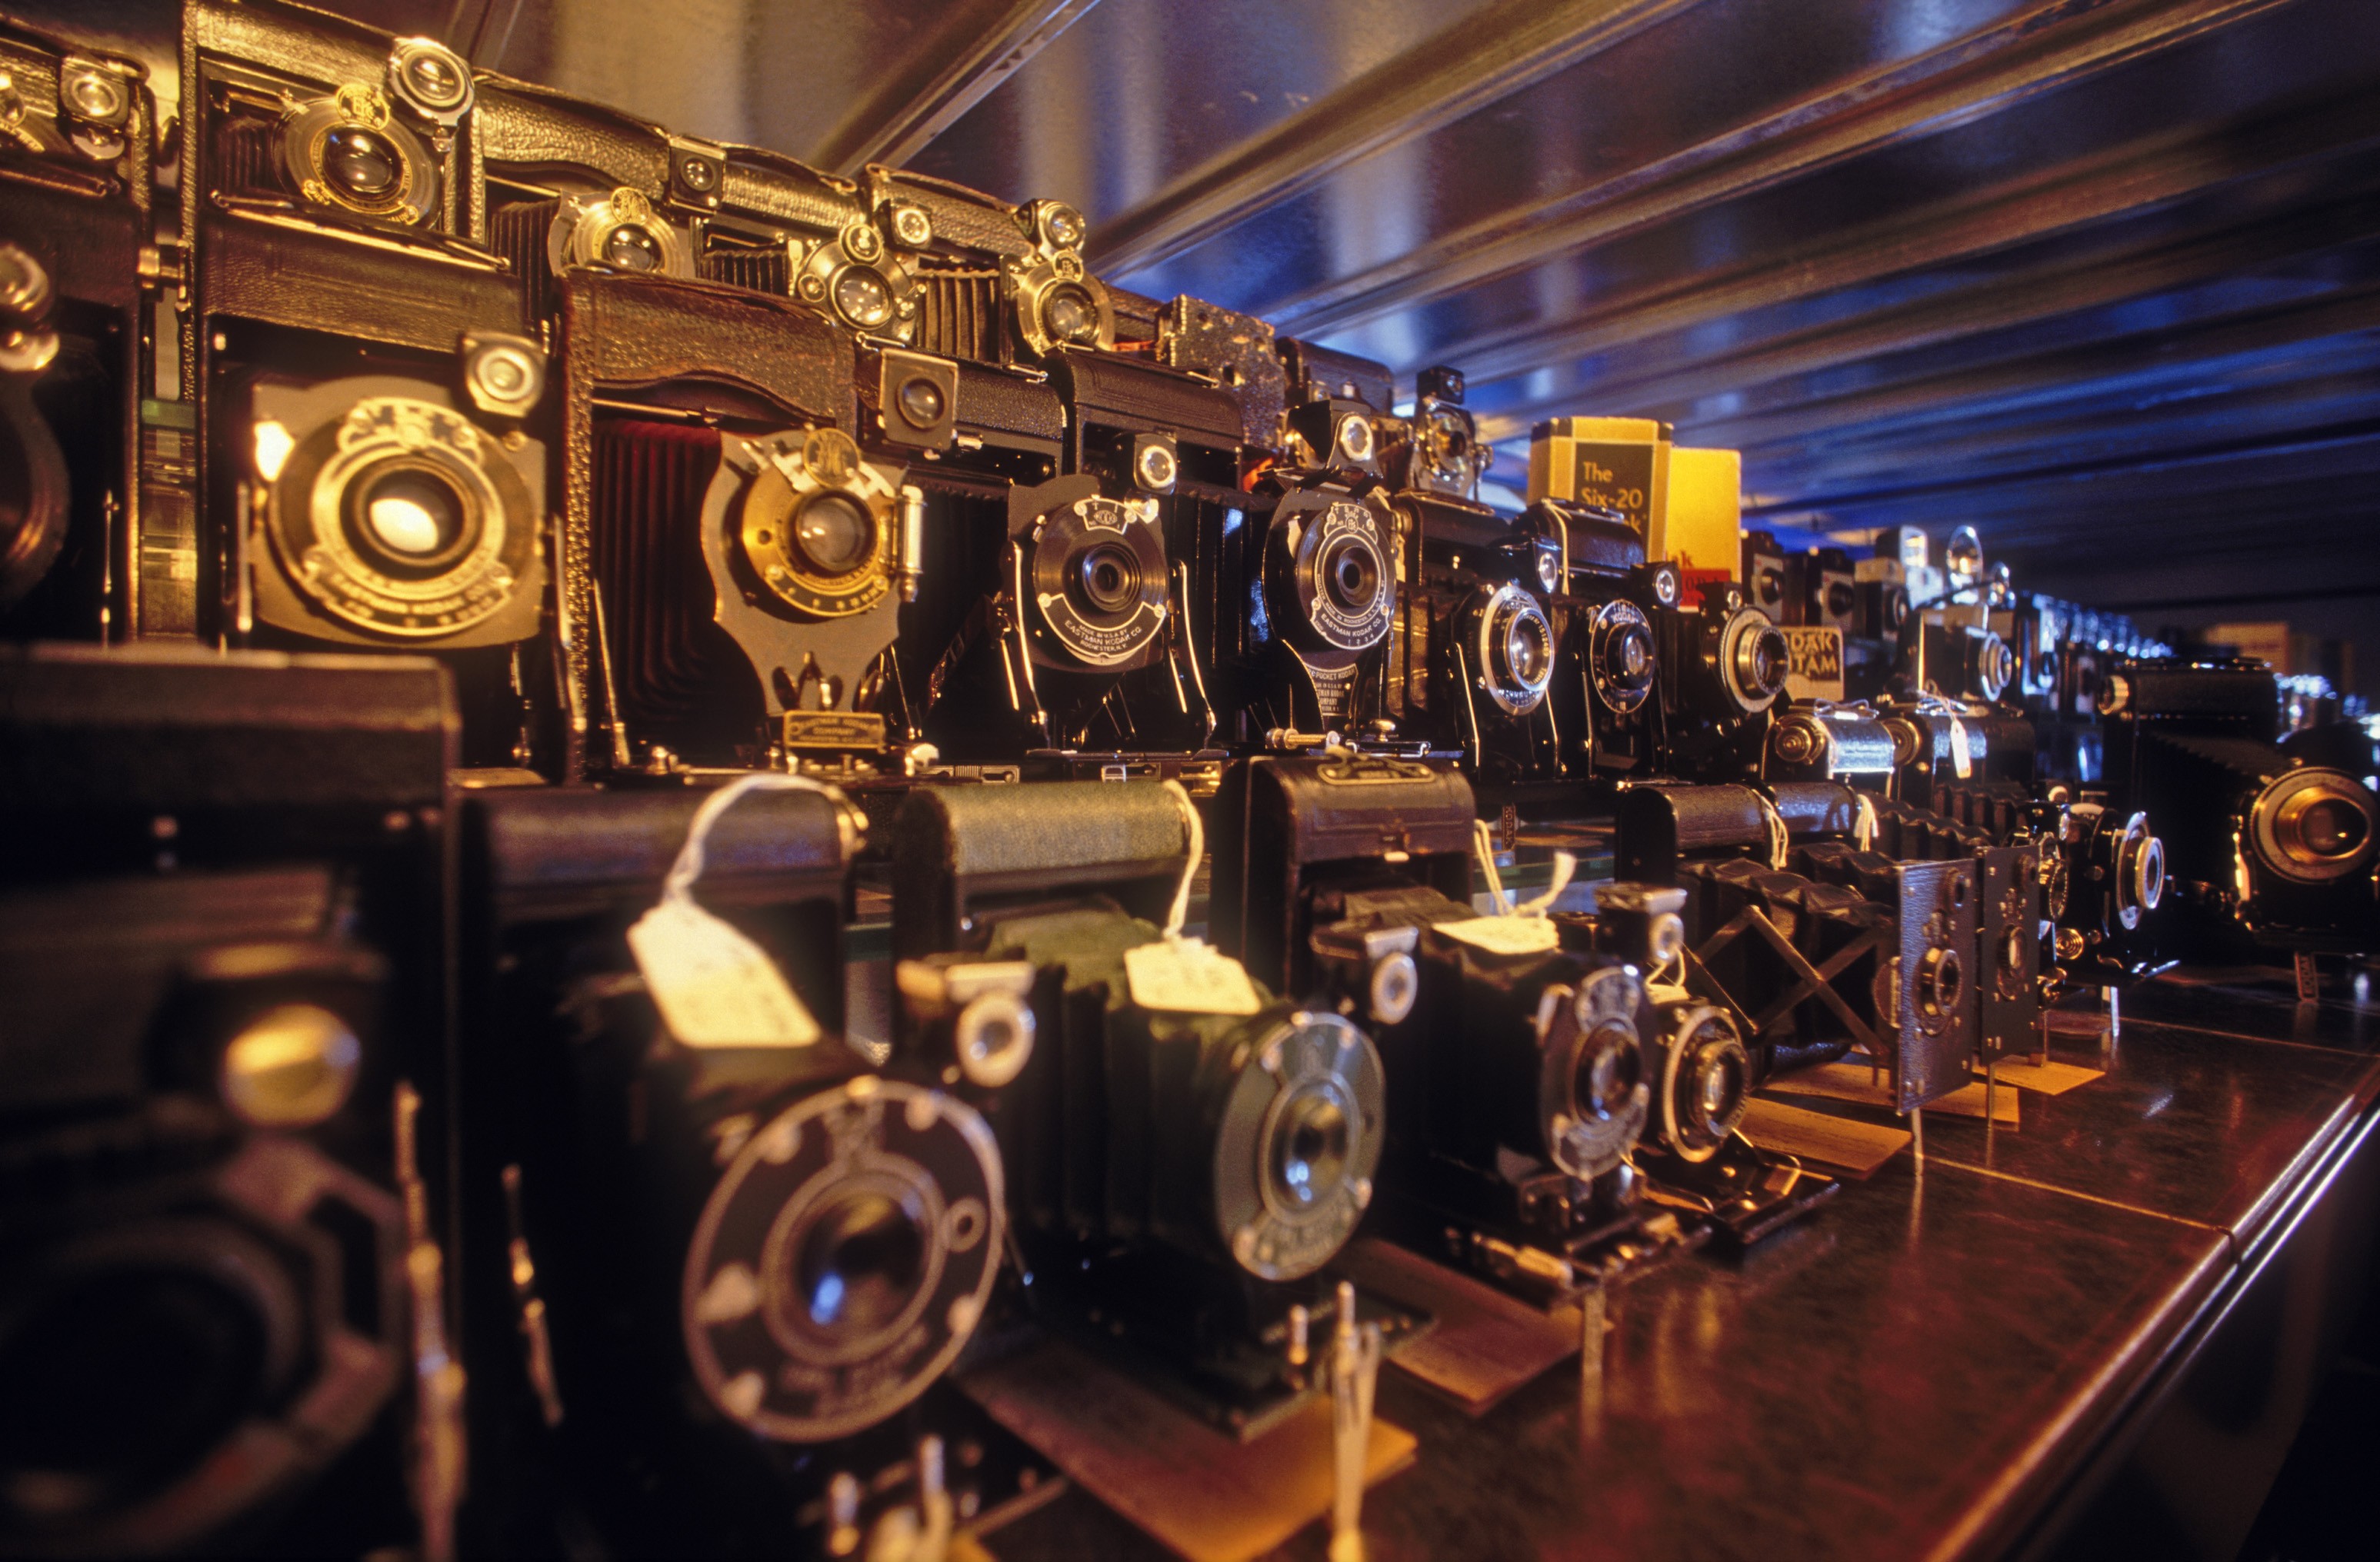 Cameras in the National Science and Media Museum collection stores